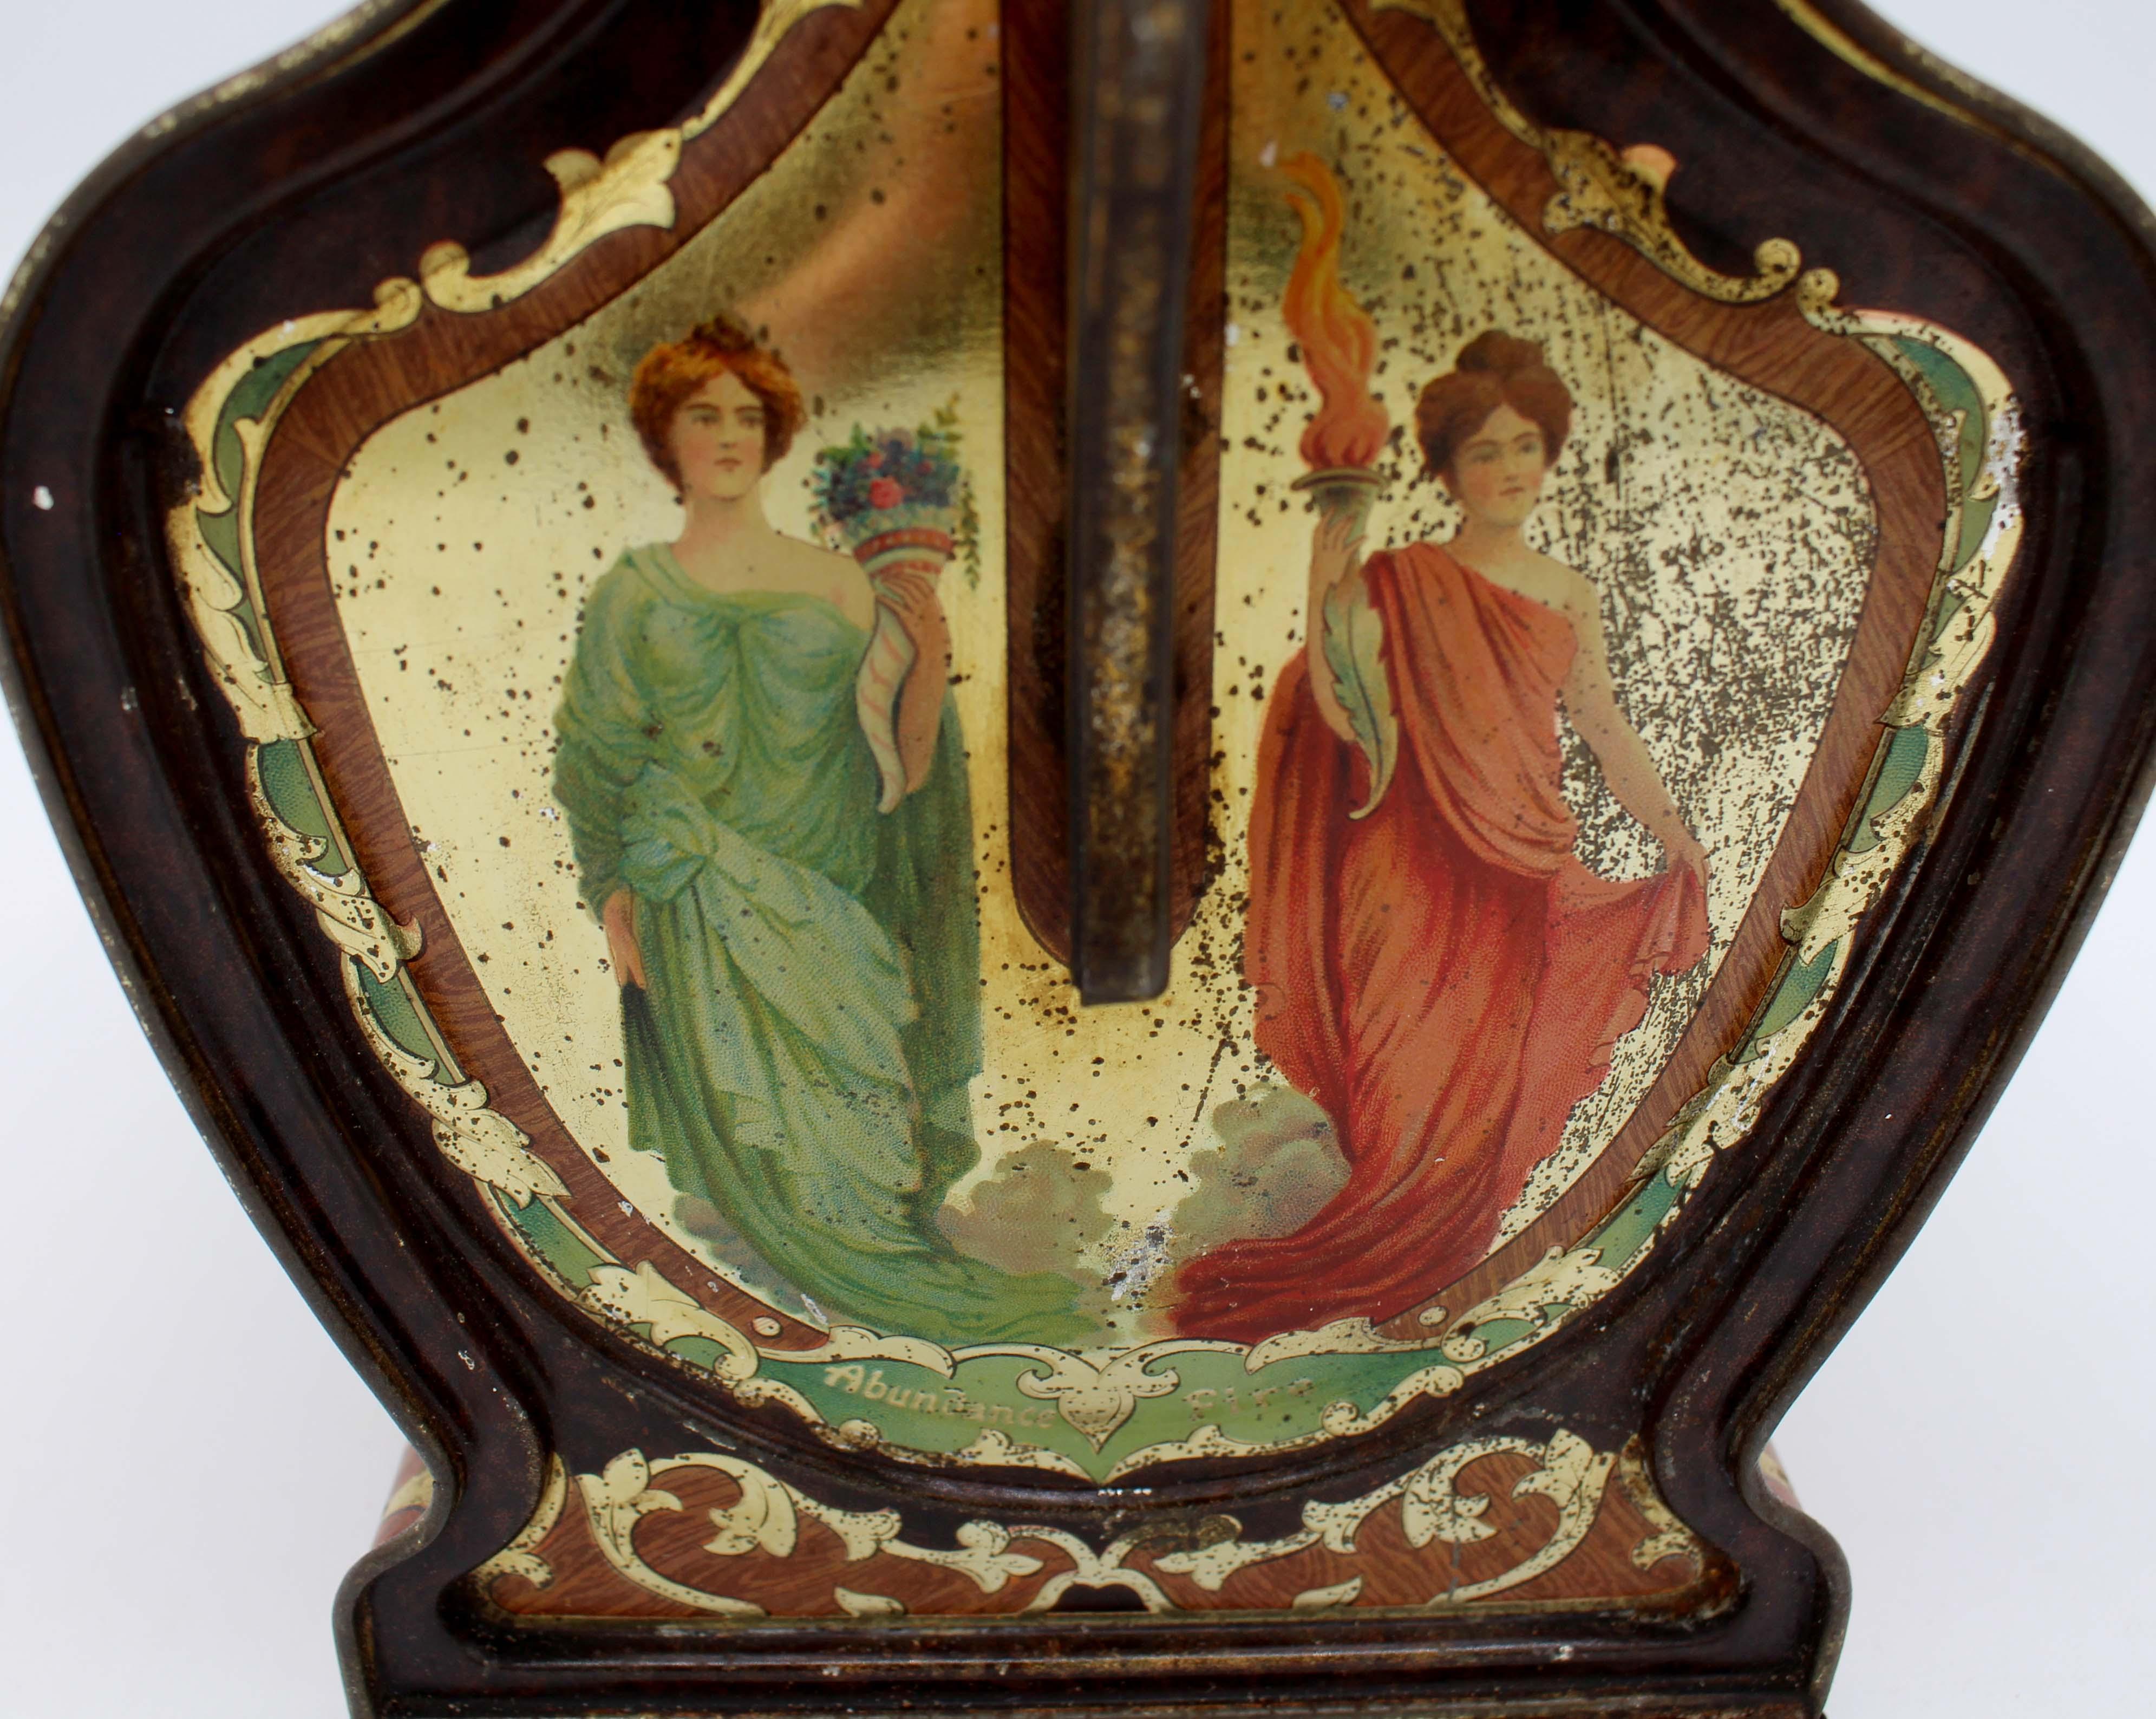 1906 Art Nouveau Biscuit Tin by Huntley & Palmers In Good Condition For Sale In Chapel Hill, NC